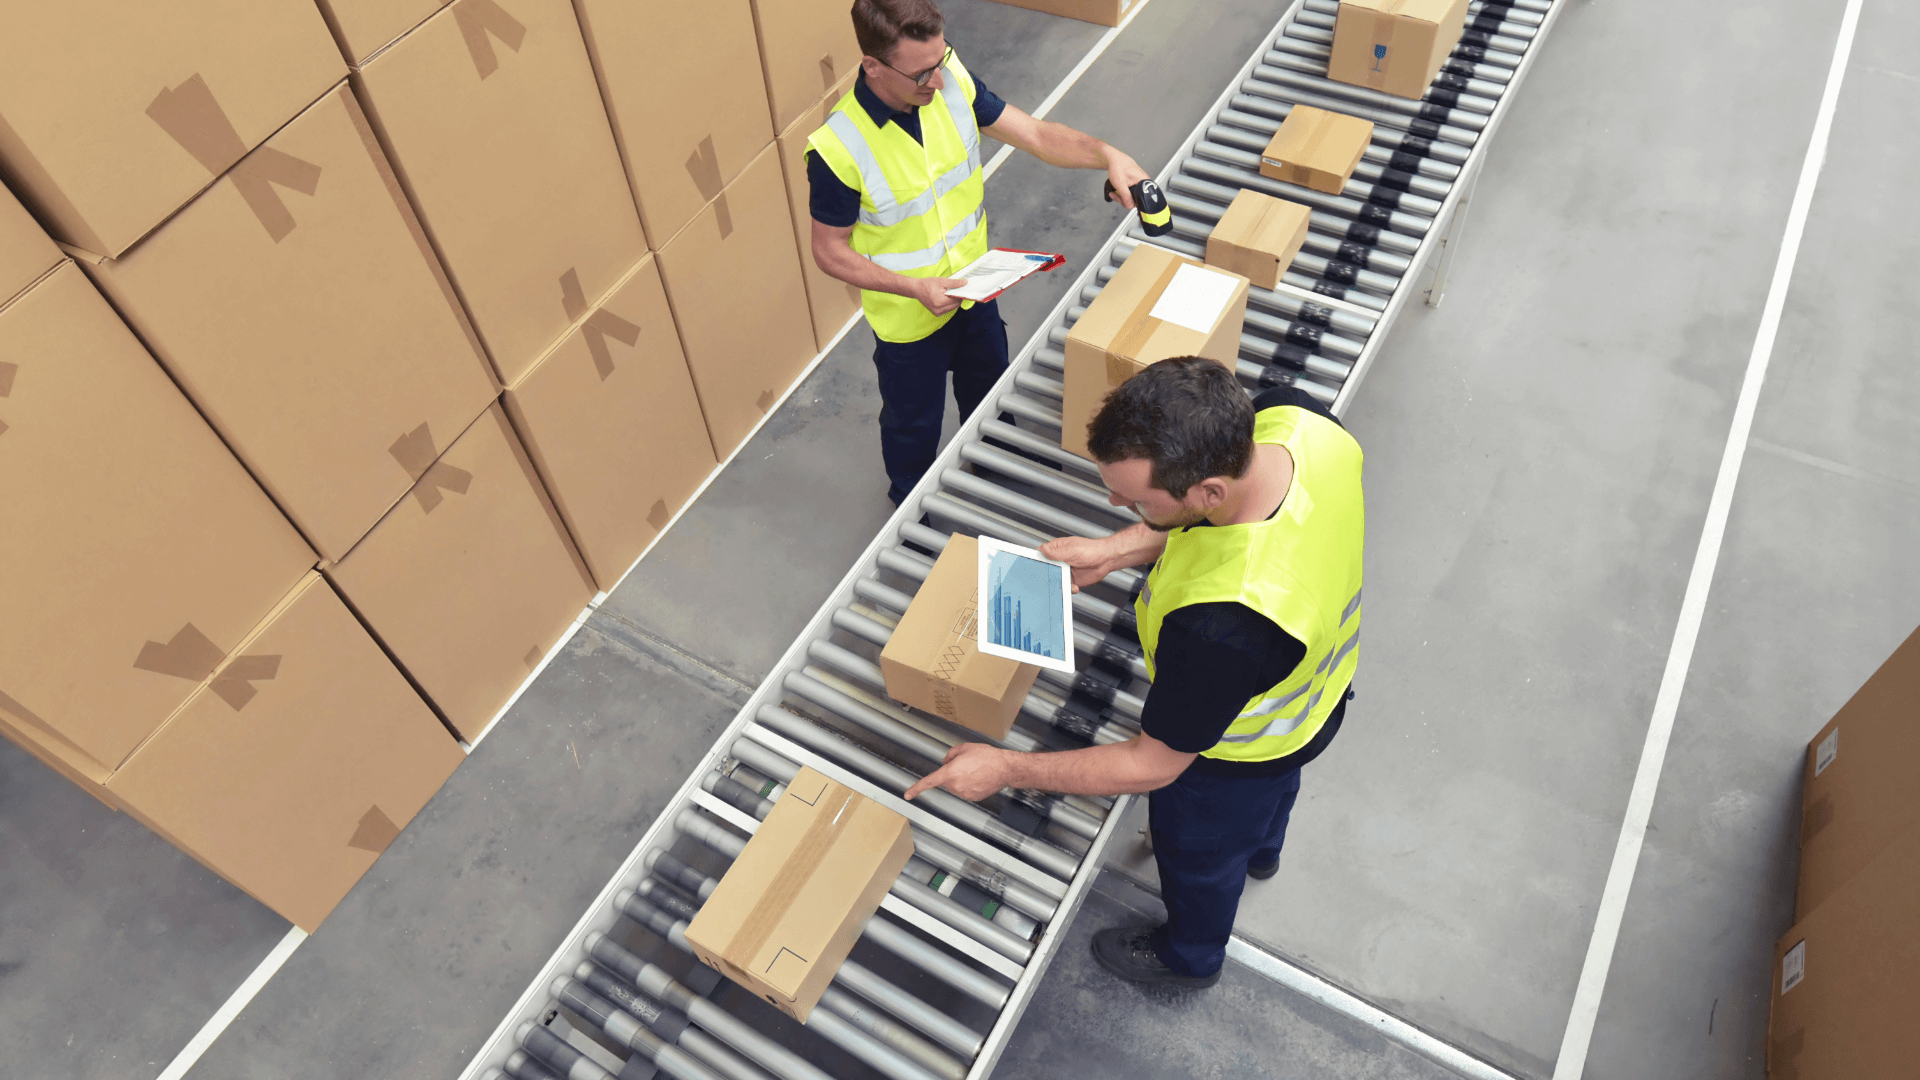 Everything About Ecommerce Order Fulfillment for Brands & 3PLs